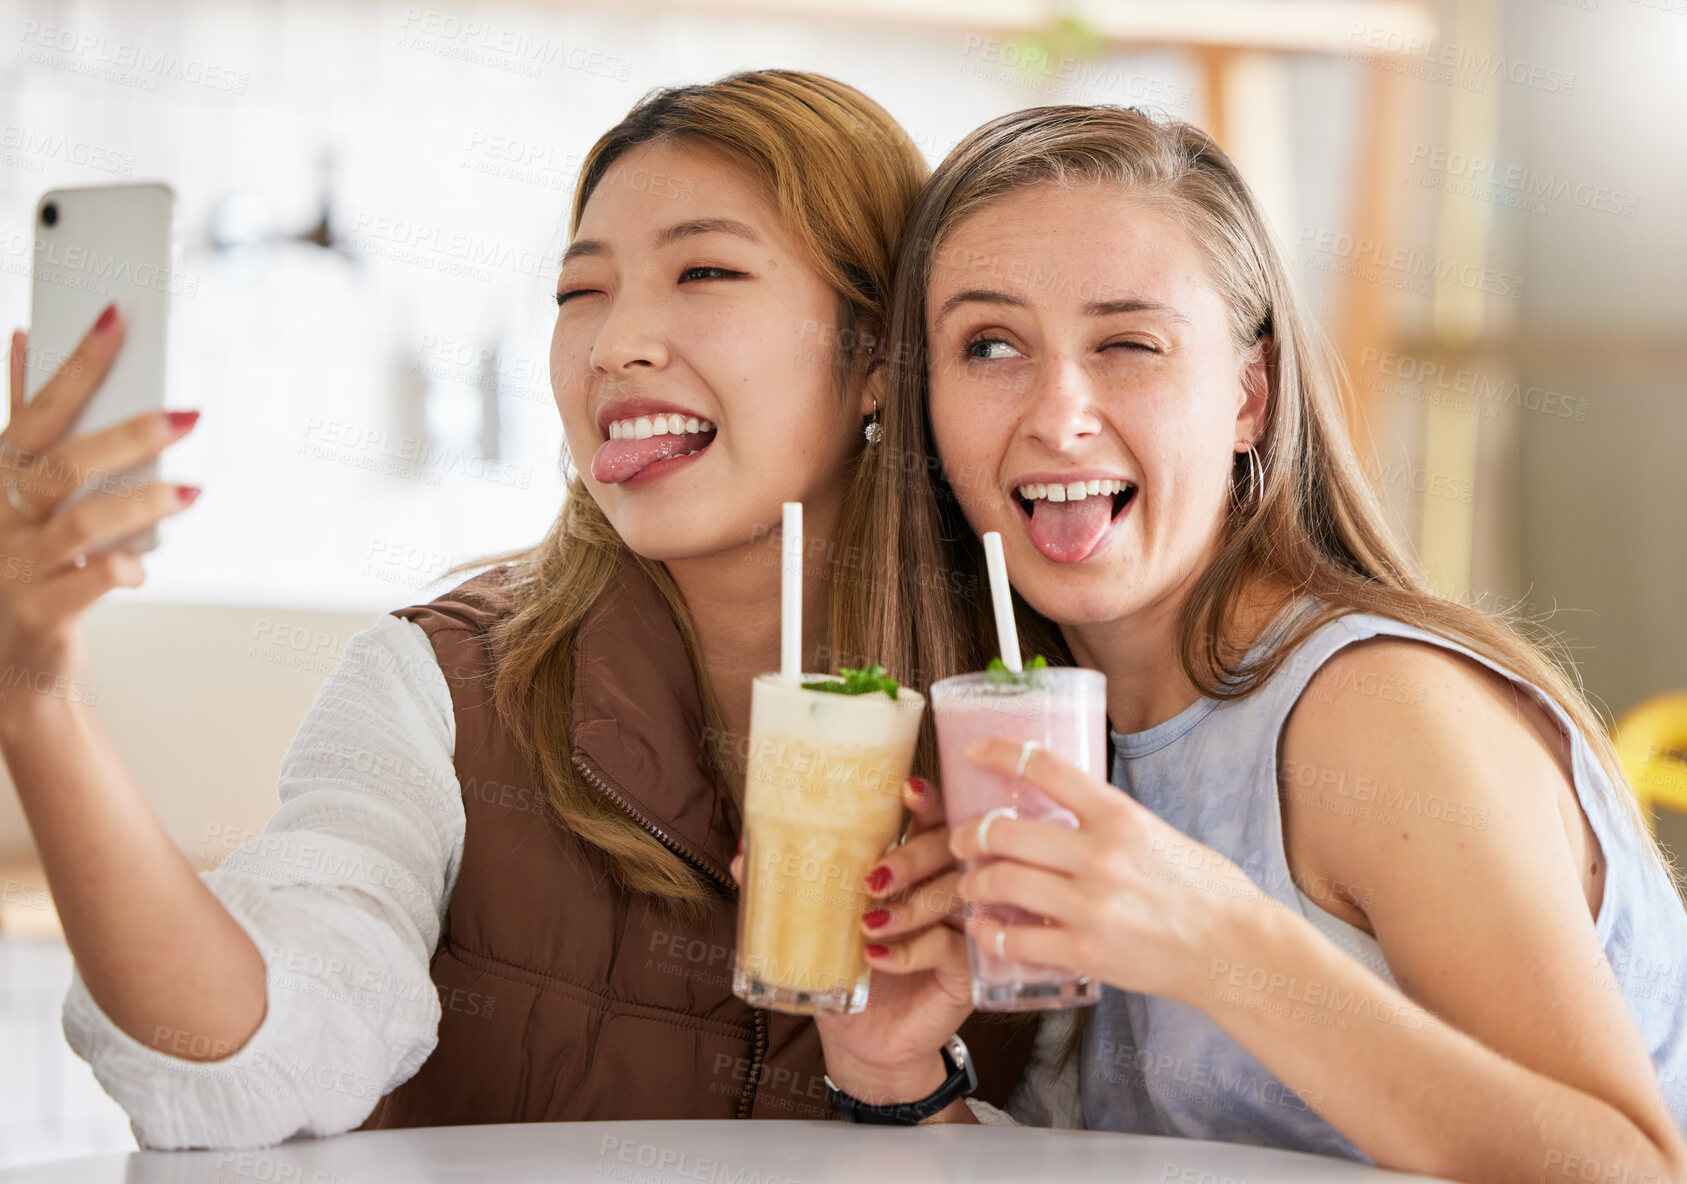 Buy stock photo Selfie, wink or funny friends take profile picture in cafe with happy smile on holiday vacation or weekend. Crazy faces, Asian or young women smiling for social media posts brunch date with cocktails